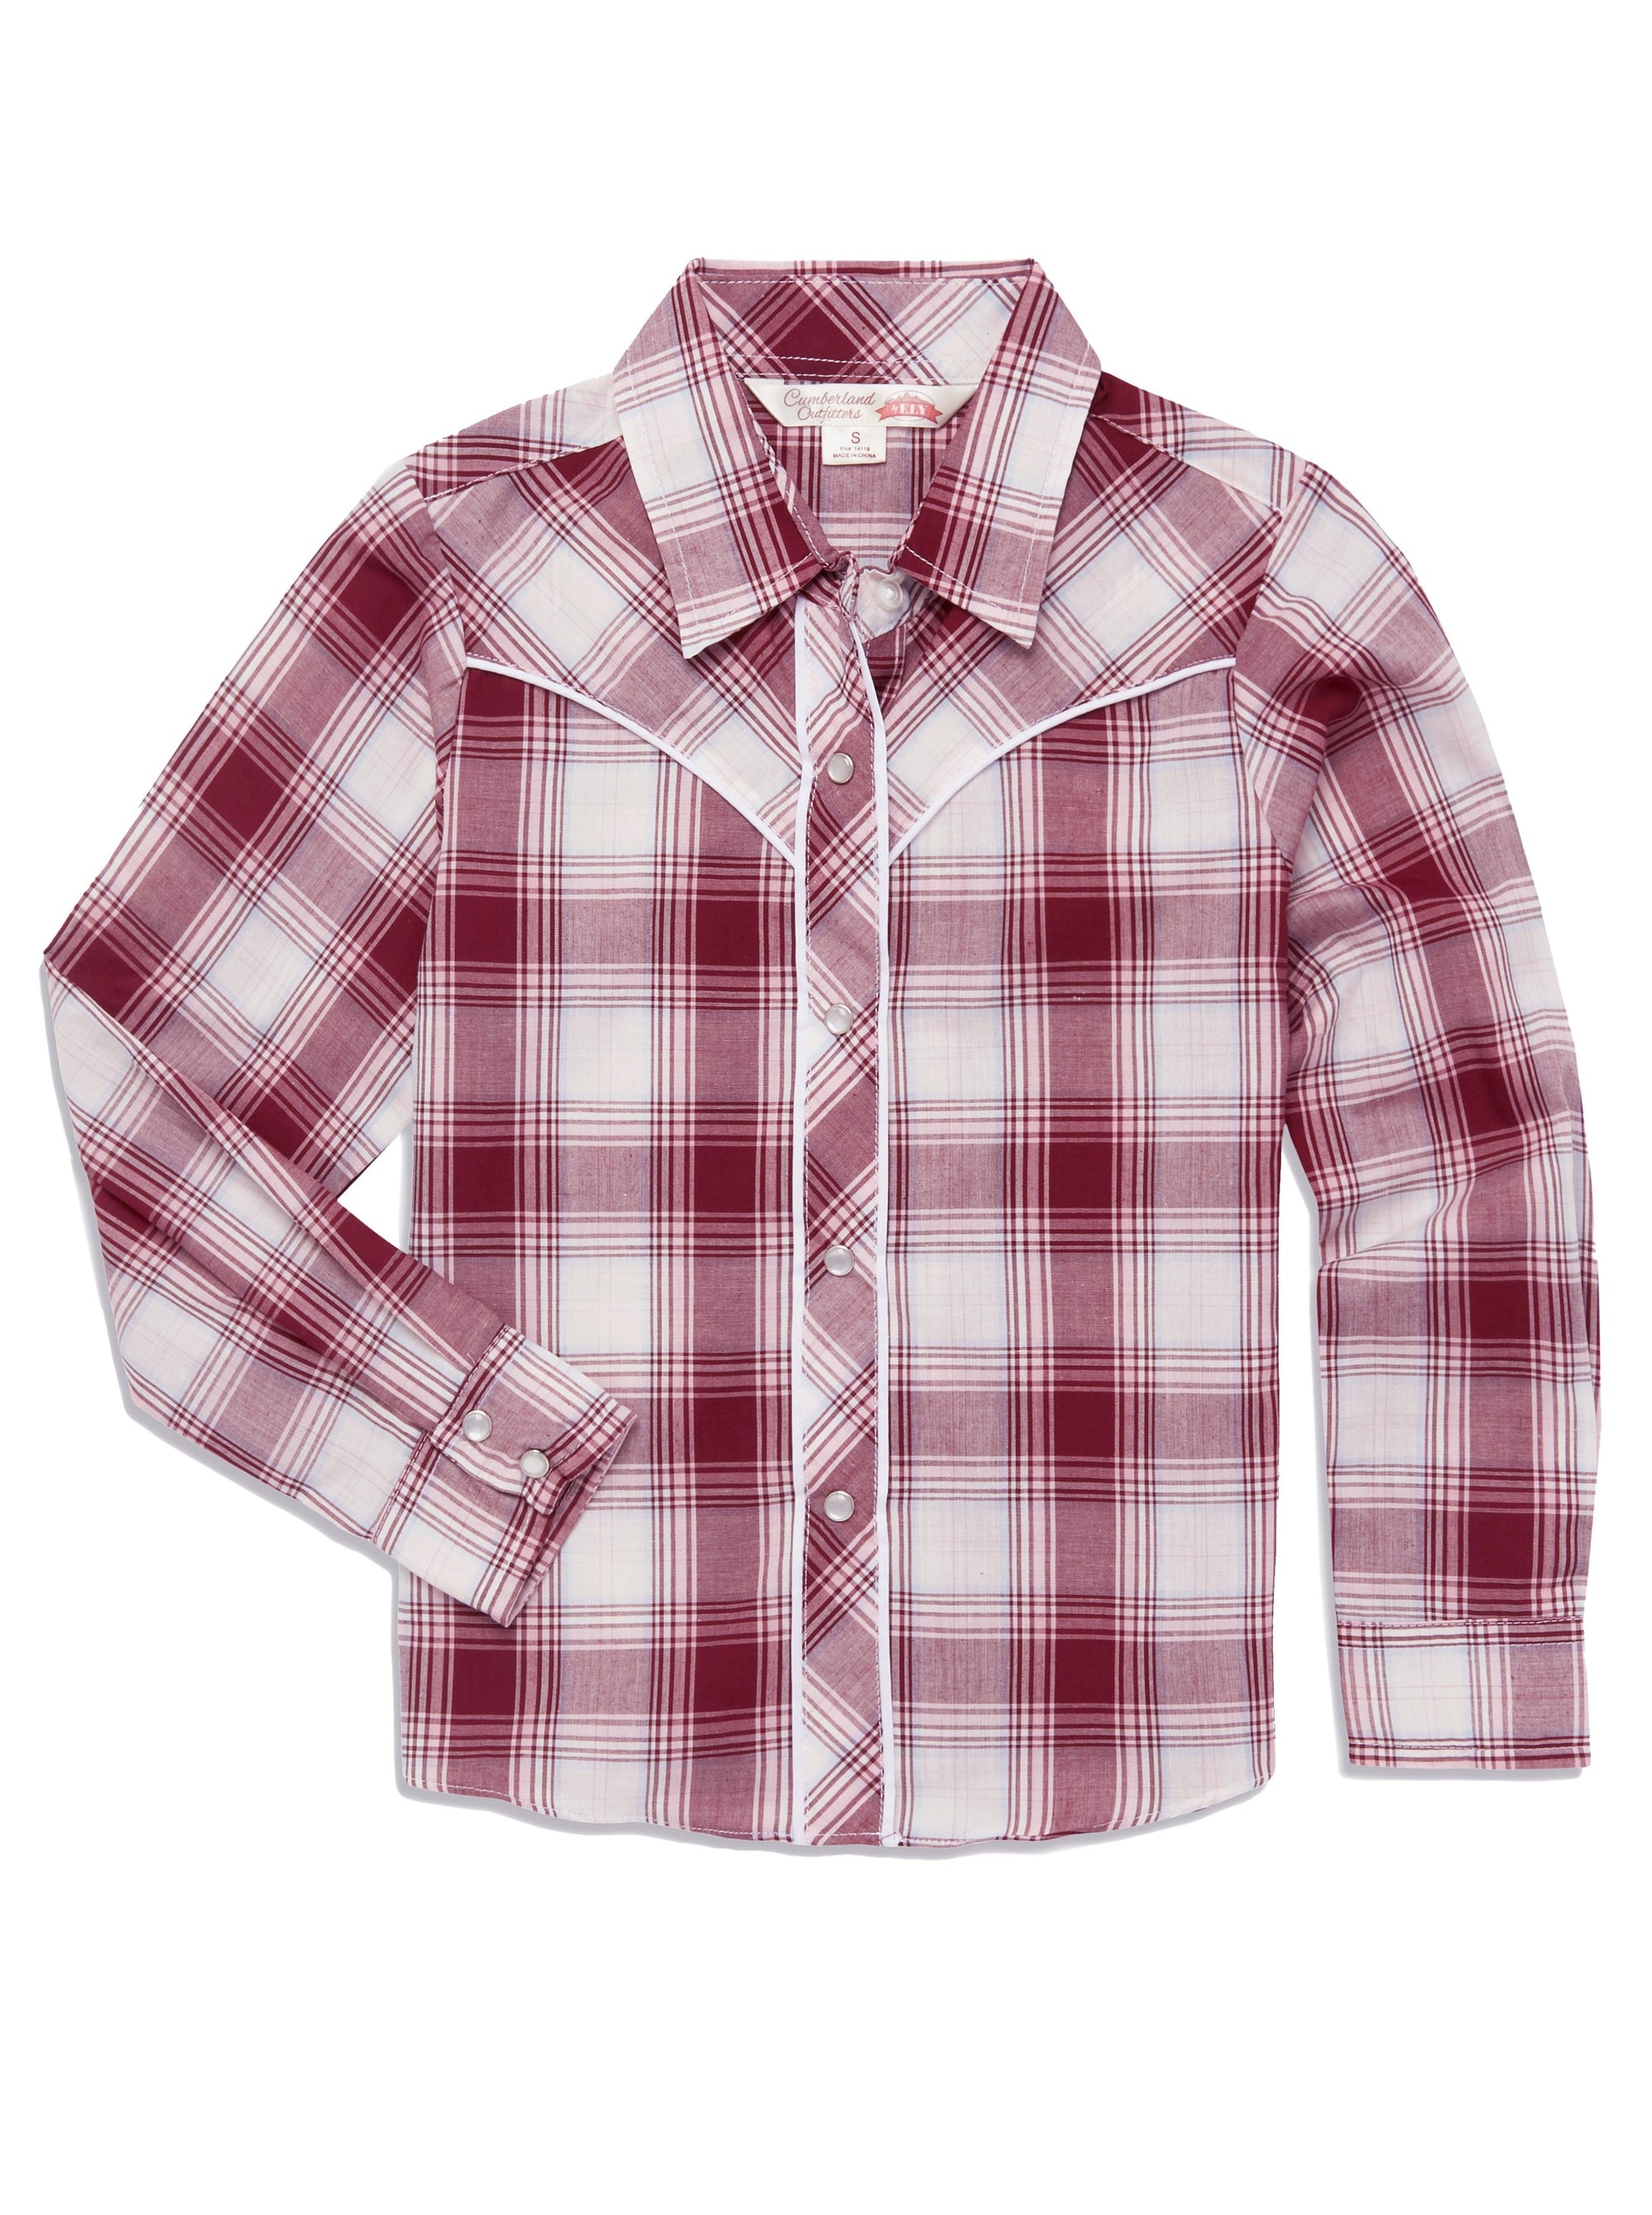 Girl's Ely Cattleman Plaid Western Snap Shirt with Piping